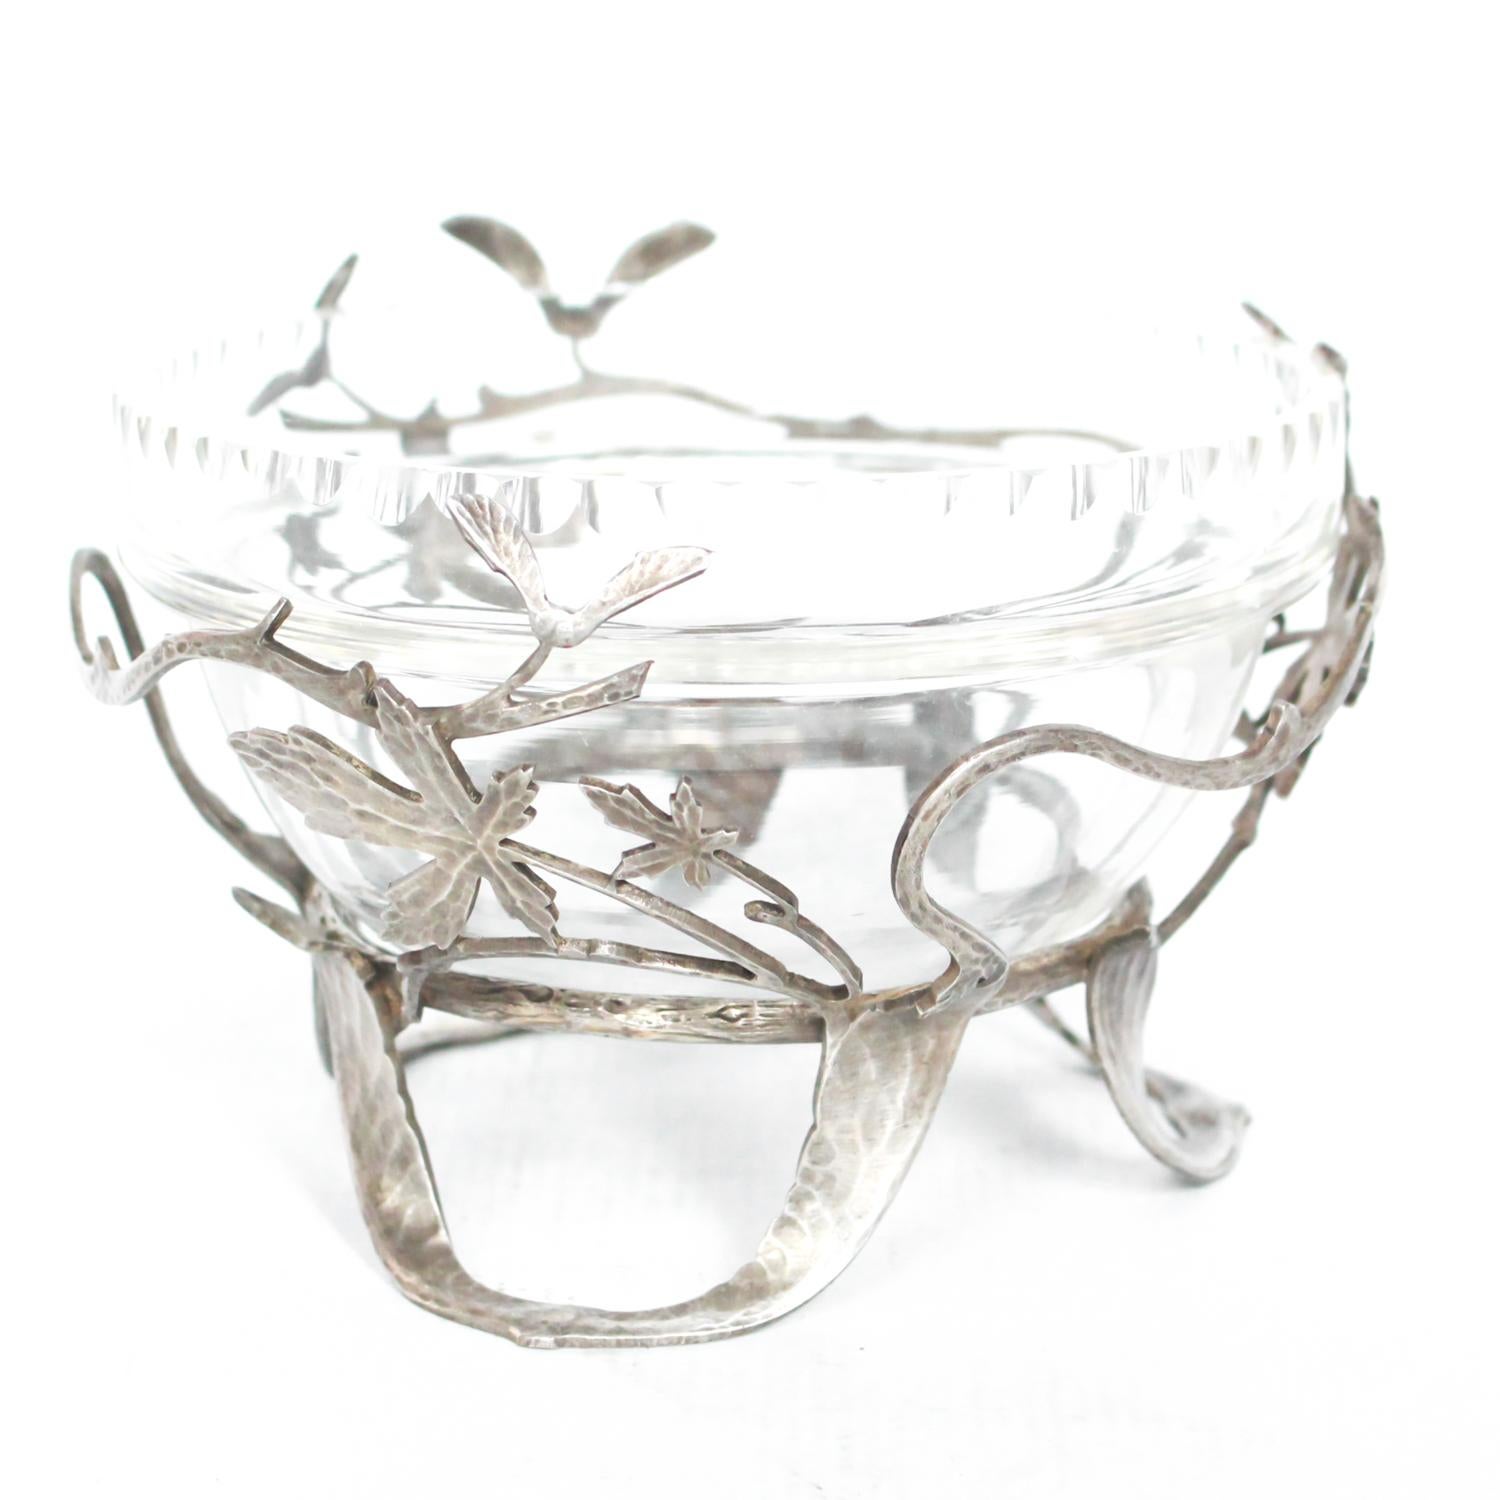 Art Deco, silvered bronze and glass dish. Designed with hand-hammered branches and leaves. Removable original glass bowl. Signed 'Val' to leg.

Dimensions: H 8.5cm D 12cm

Origin: French

Date: circa 1910

Item No: 2808193.